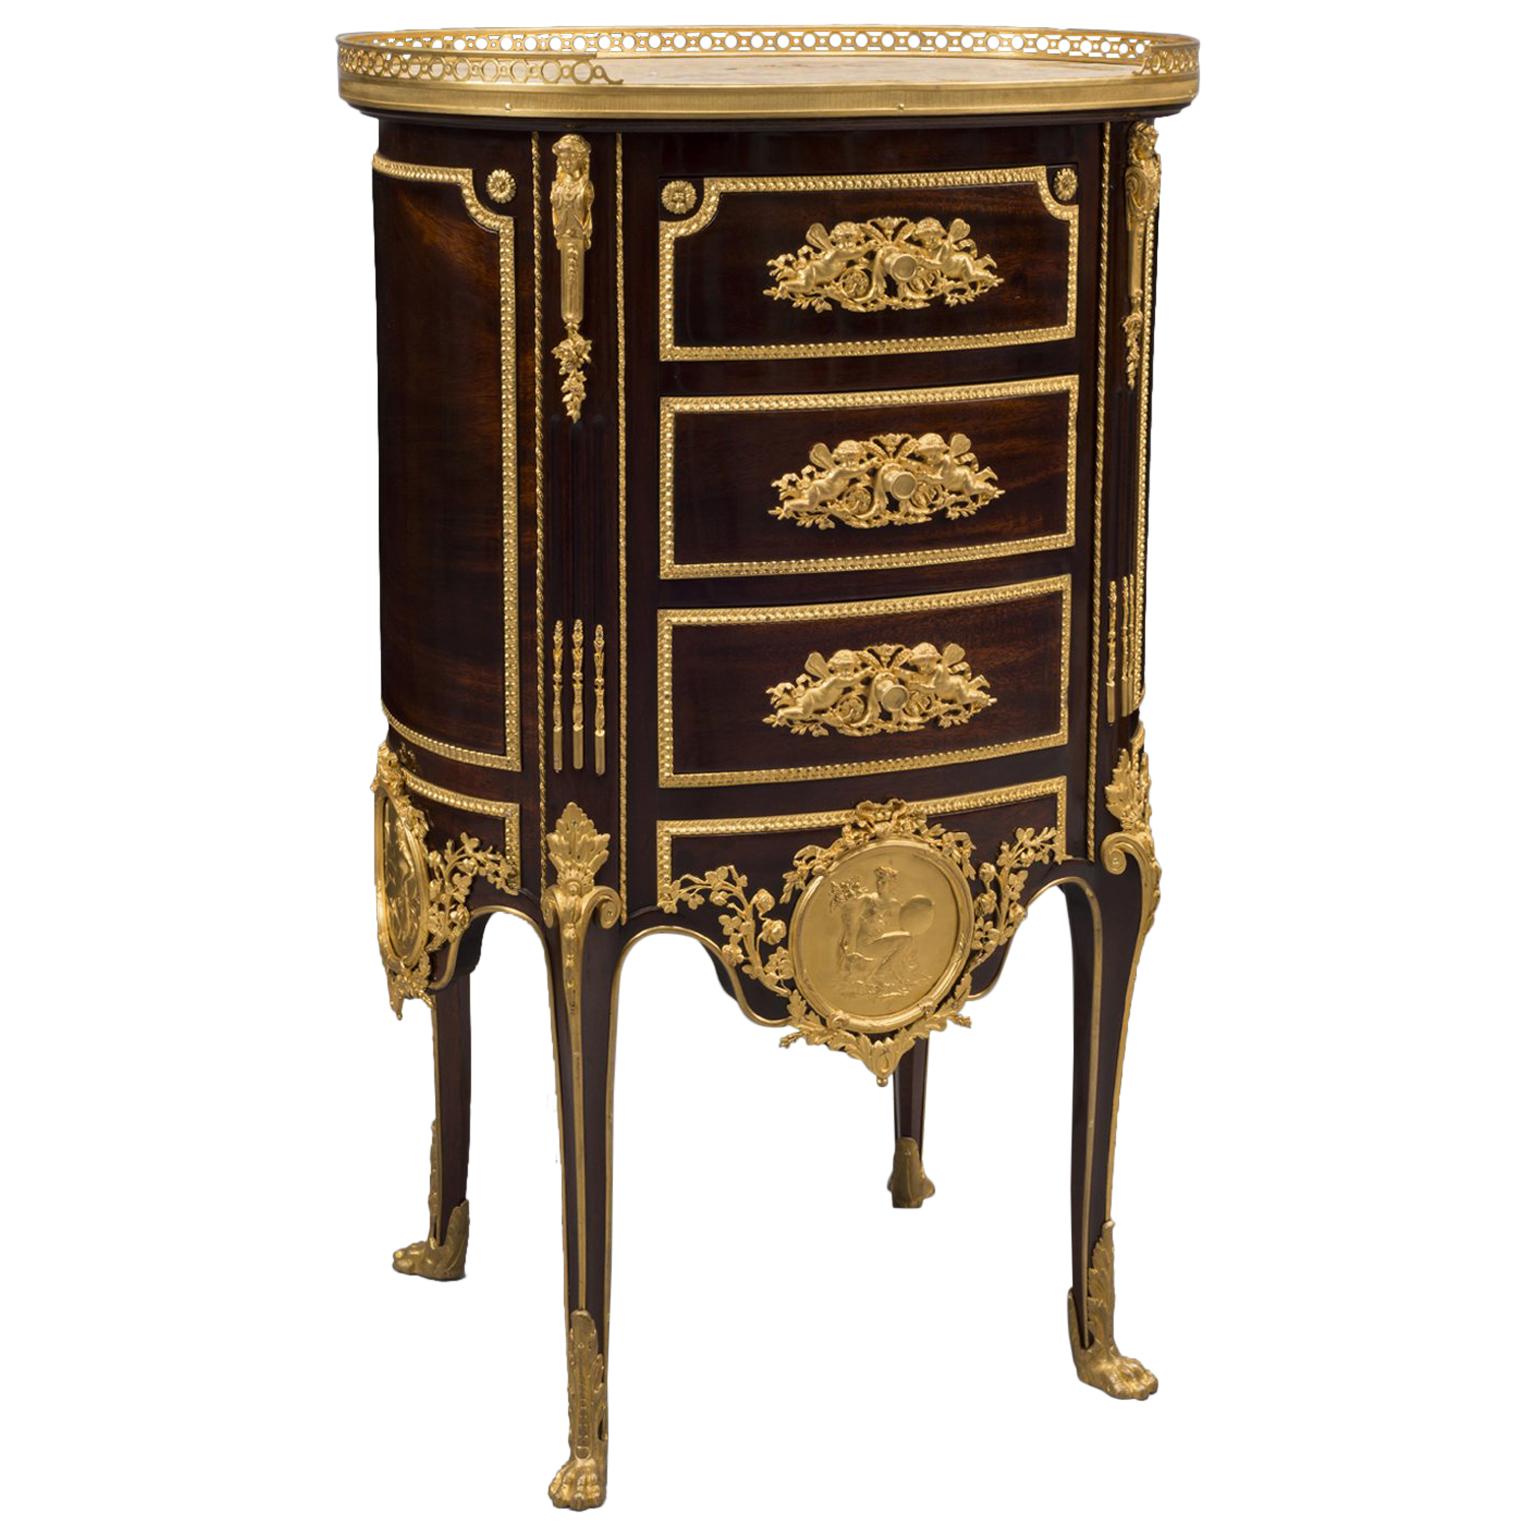 Transitional Style Gilt Bronze Mounted Mahogany Chiffonier Tambour, circa 1880 For Sale